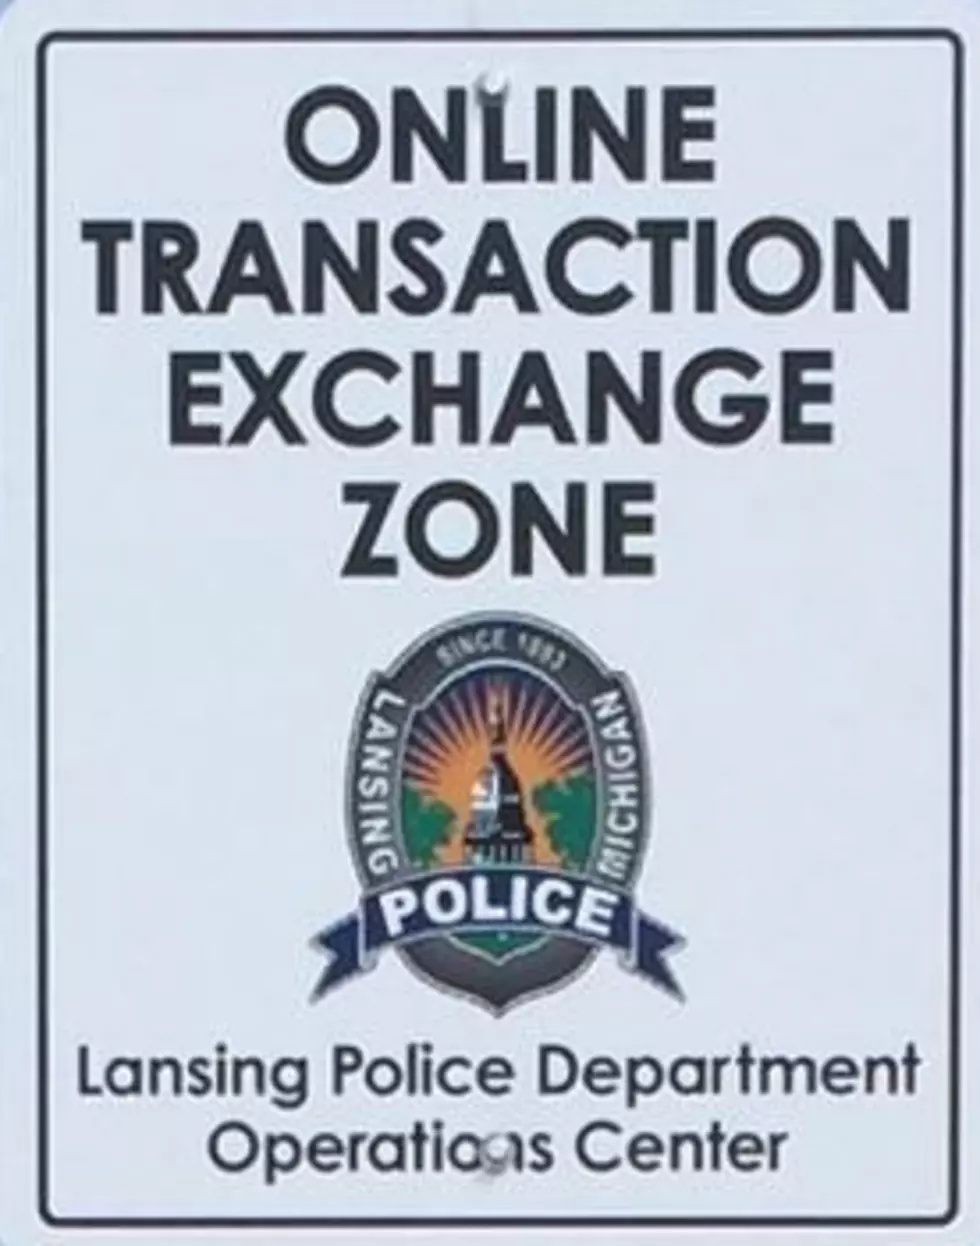 Lansing “Safe Zone” for Your Online Transactions